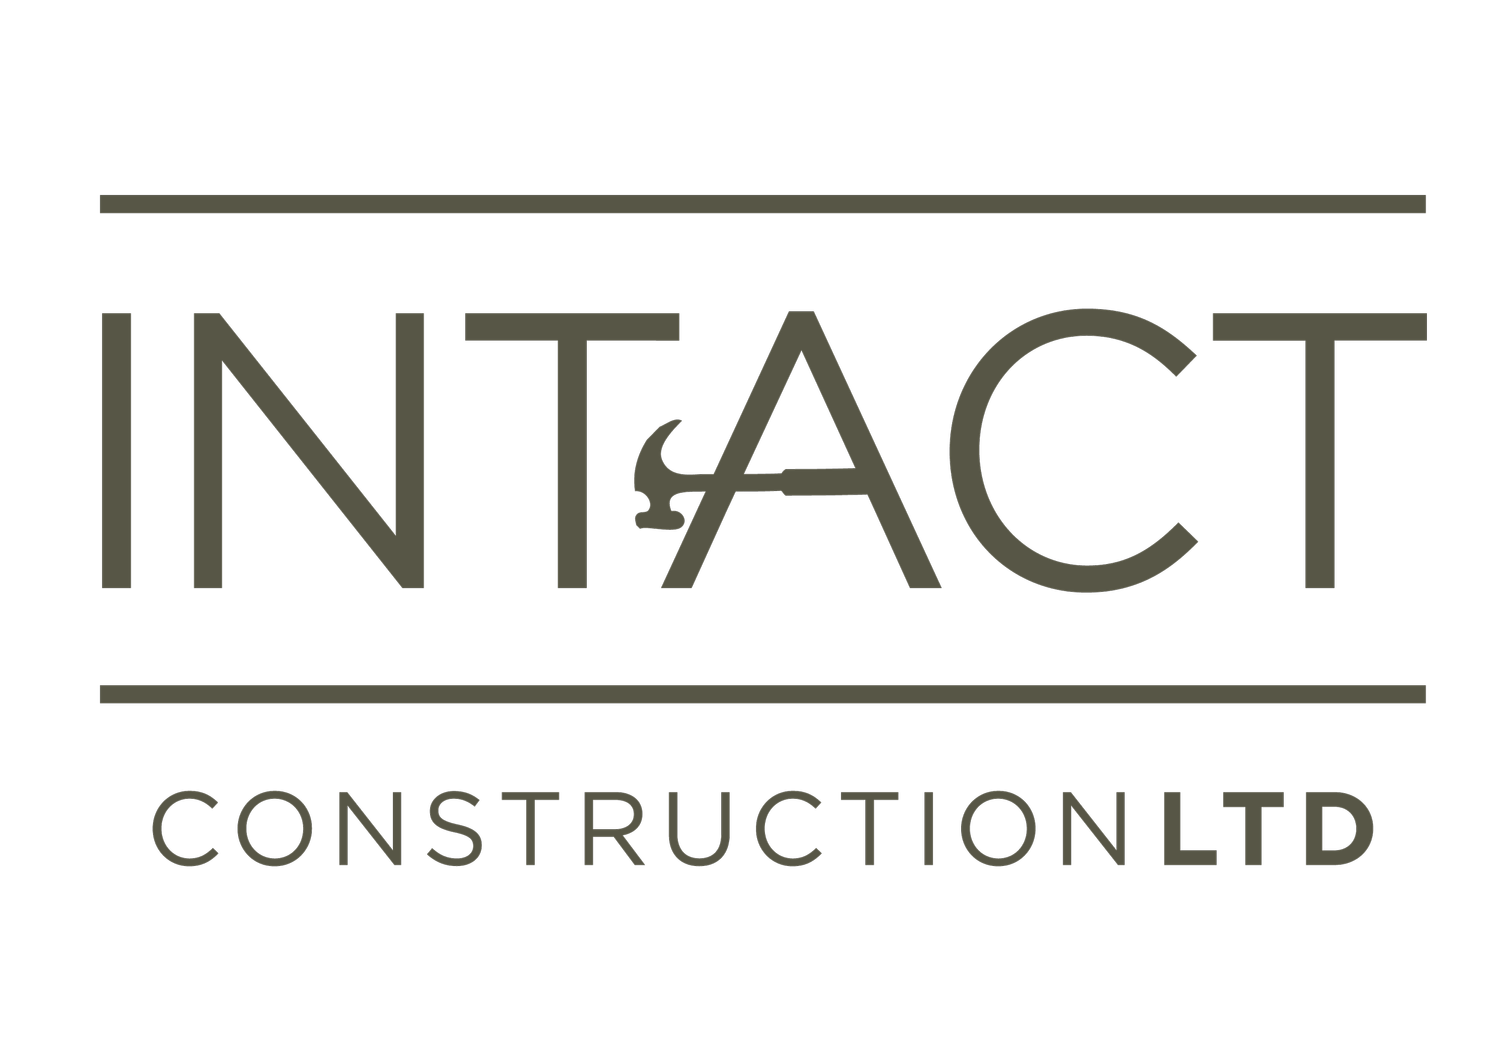 Intact Construction